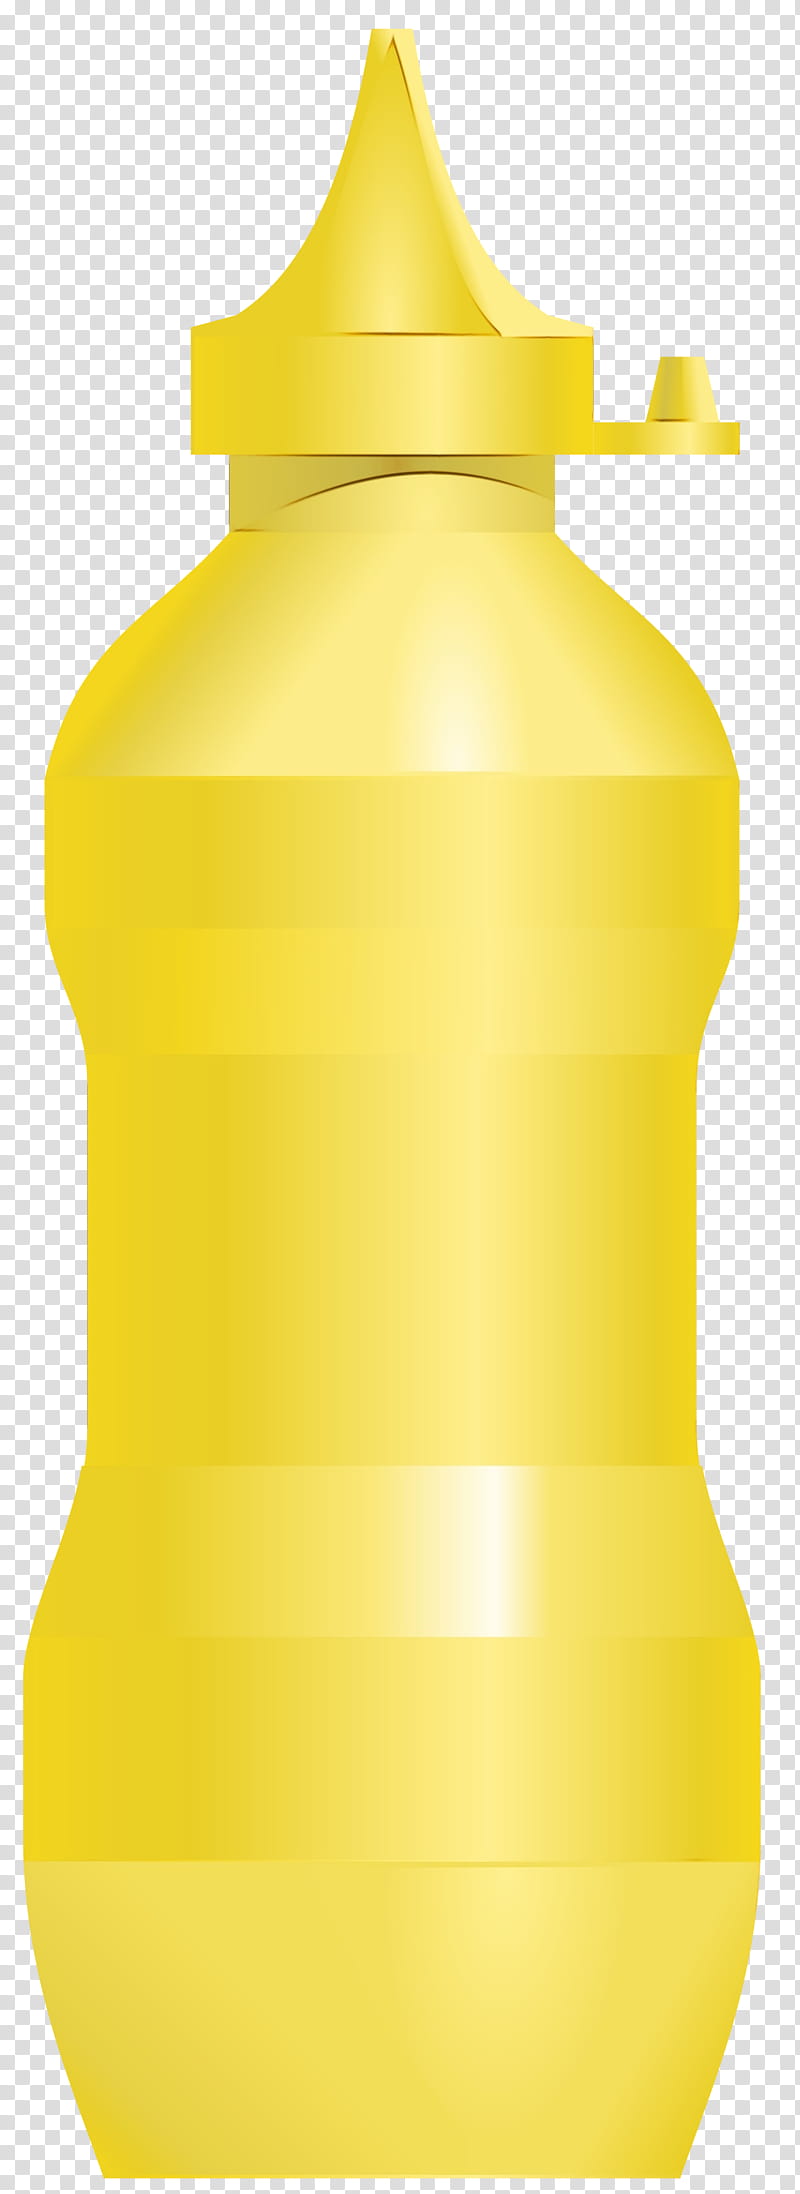 Plastic Bottle, Yellow, Water Bottle, Sports Drink, Drinkware, Home Accessories transparent background PNG clipart